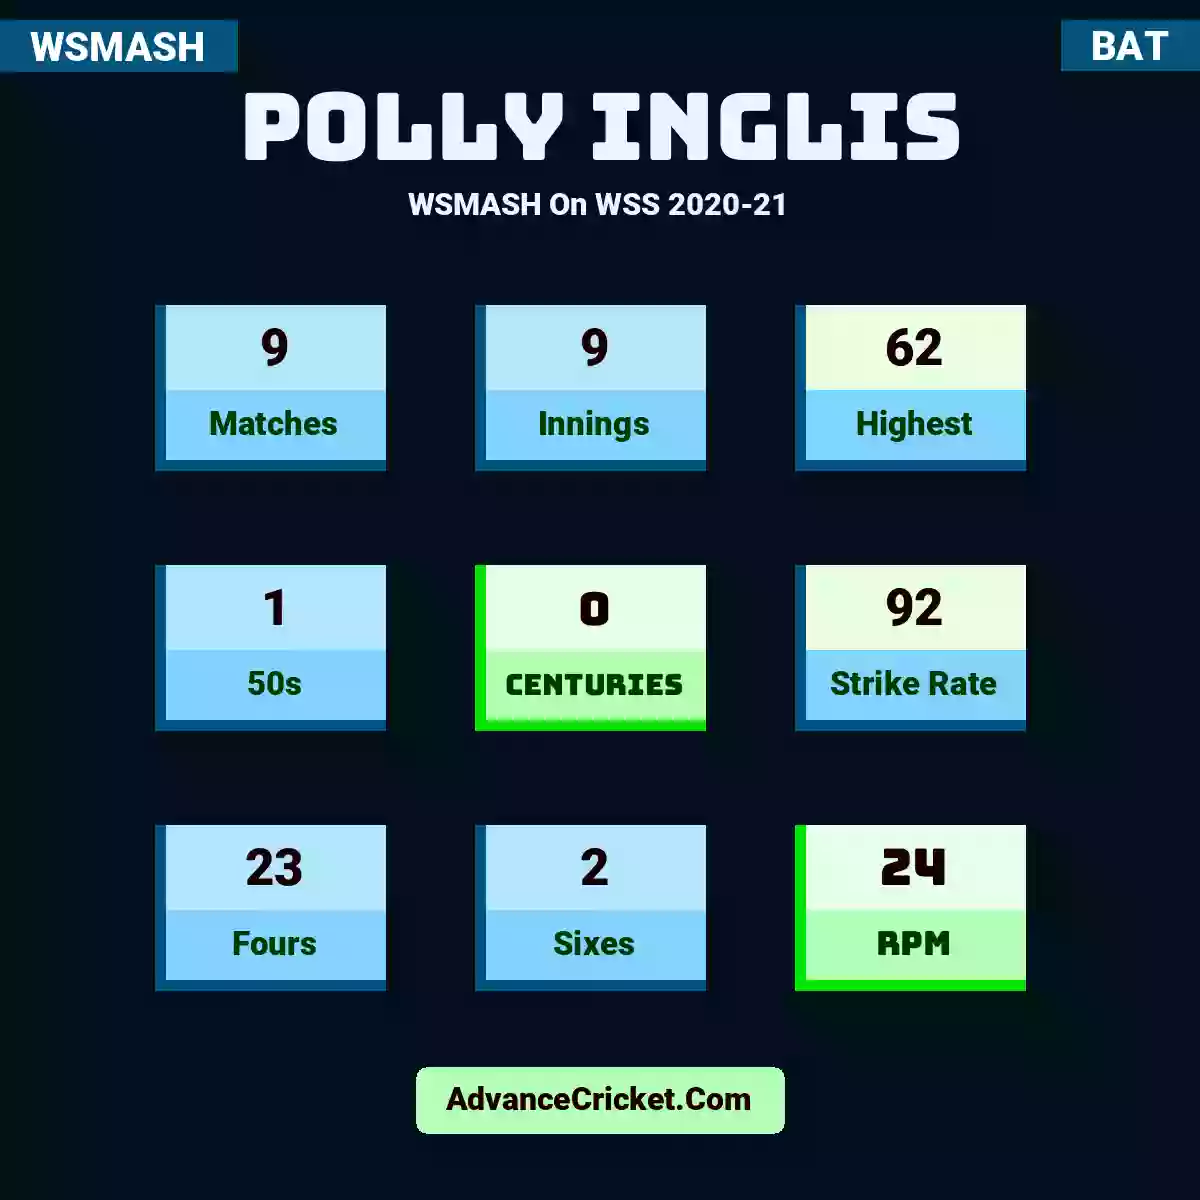 Polly Inglis WSMASH  On WSS 2020-21, Polly Inglis played 9 matches, scored 62 runs as highest, 1 half-centuries, and 0 centuries, with a strike rate of 92. P.Inglis hit 23 fours and 2 sixes, with an RPM of 24.